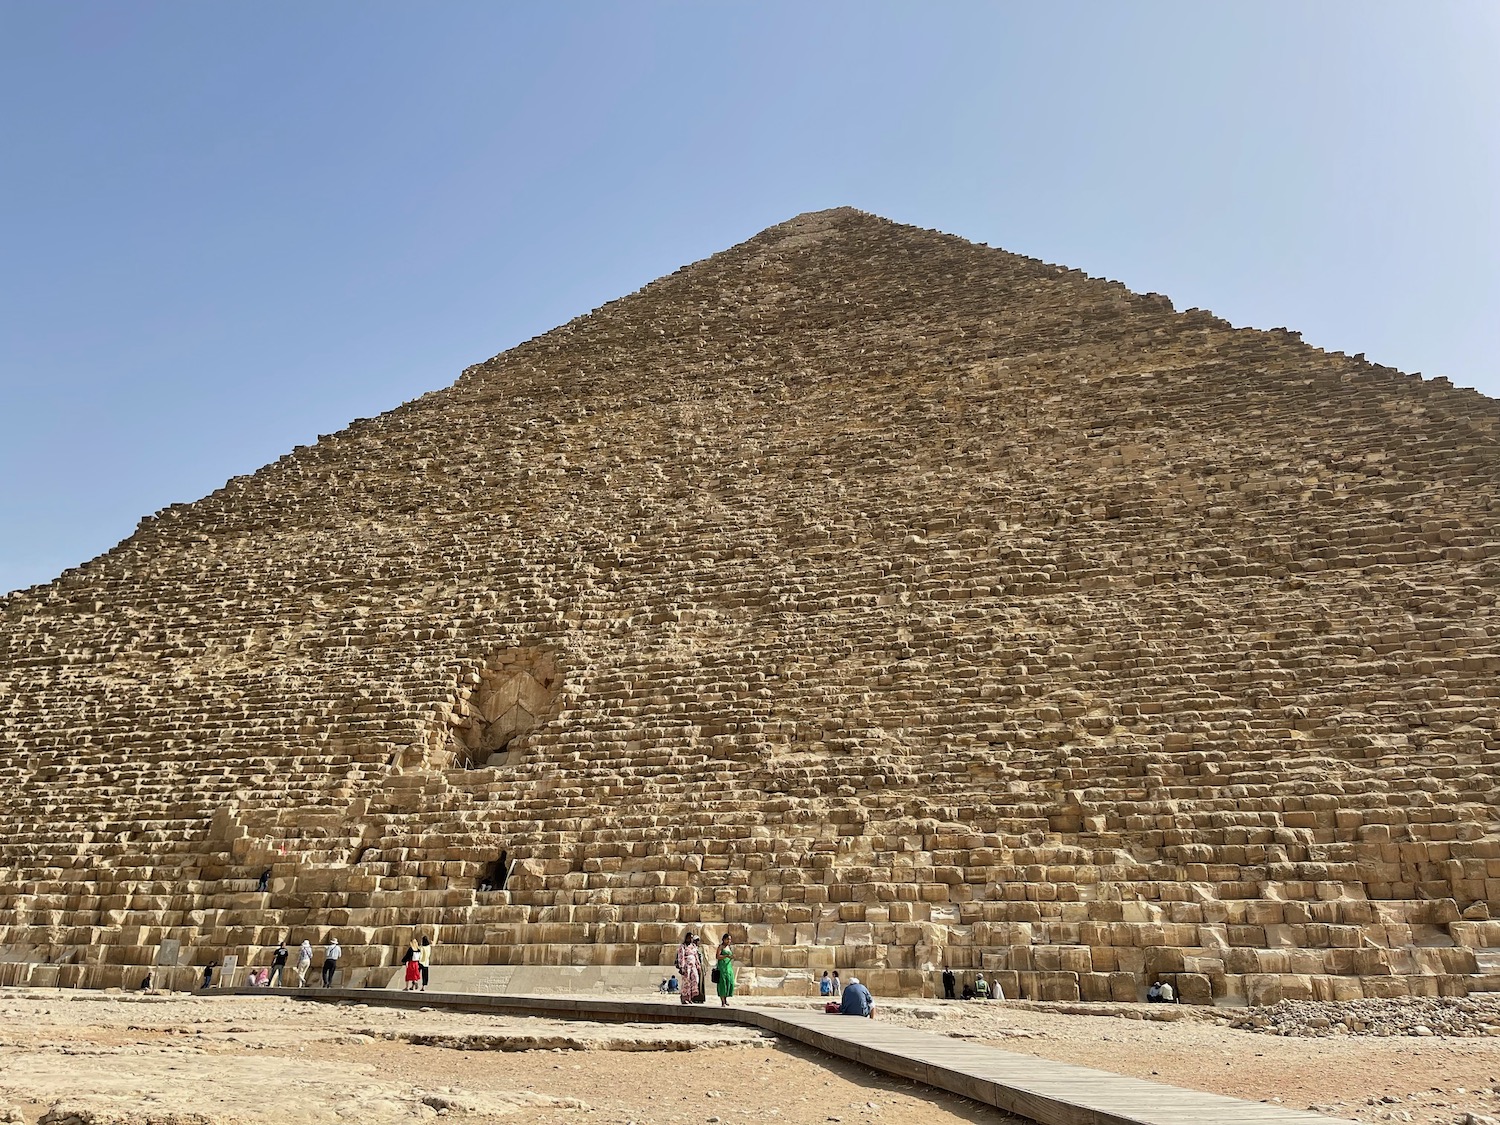 a pyramid with people walking around with Great Pyramid of Giza in the background